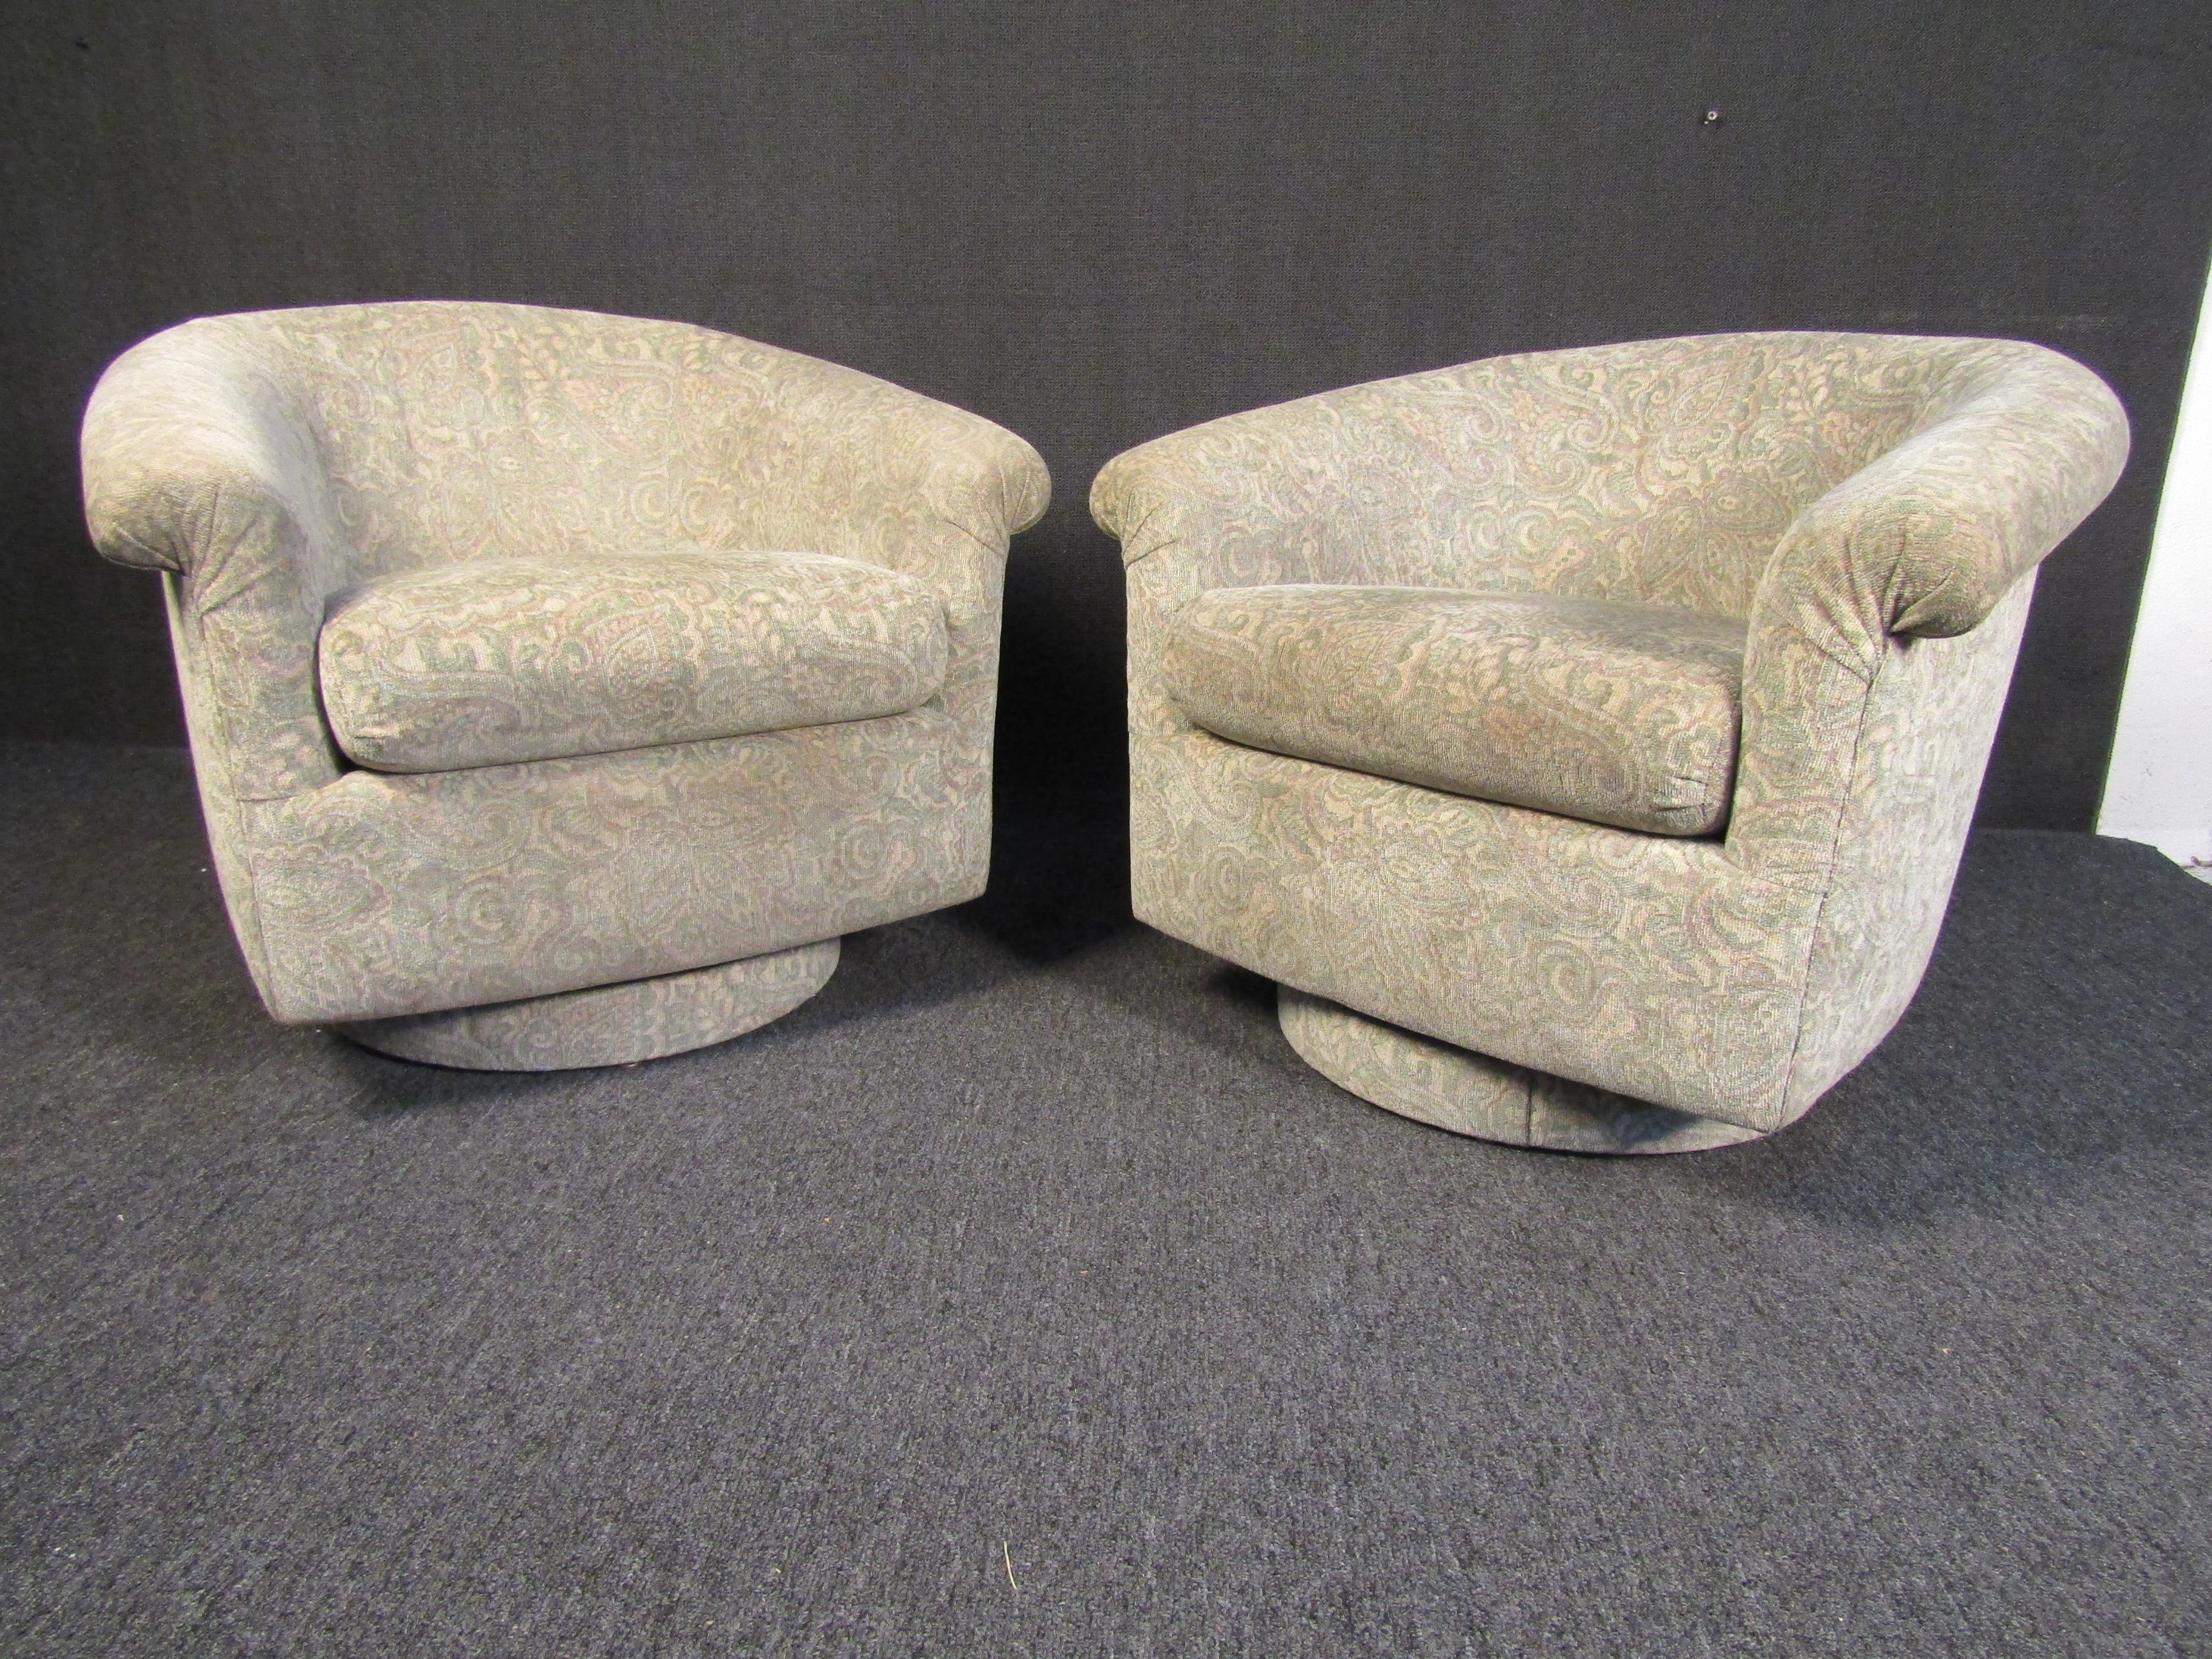 Pair of stylish Mid-Century Modern armchairs that are upholstered in an attractive beige fabric and cushioned for comfortable seating. This pair of vintage chairs is perfect for a living room, office, or any quiet reading corner. Please confirm item